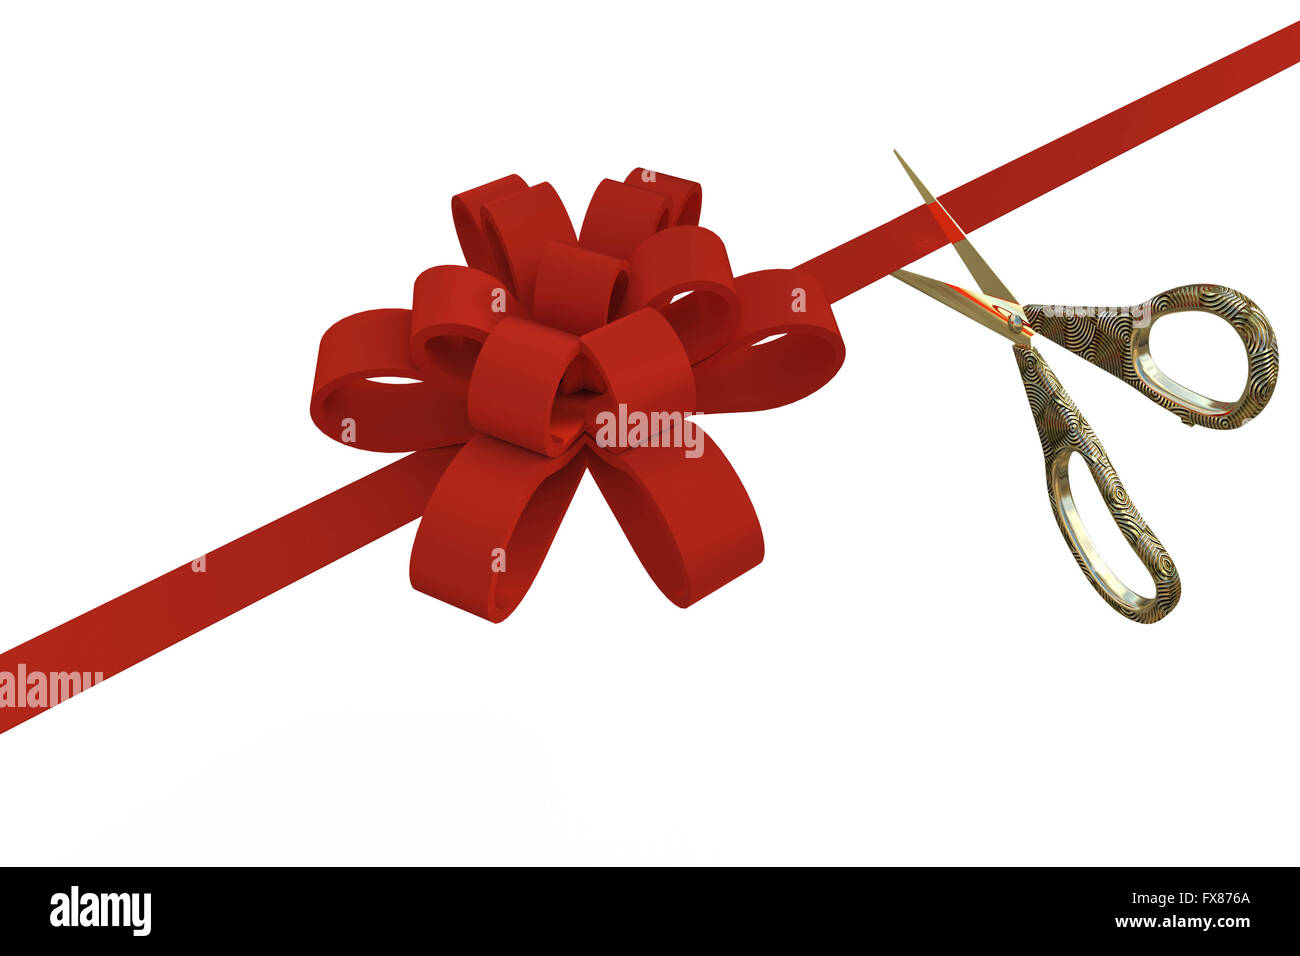 Grand opening. Top view of gold scissors cutting red ribbon on wite  background. Stock Illustration by ©vetre #274157802